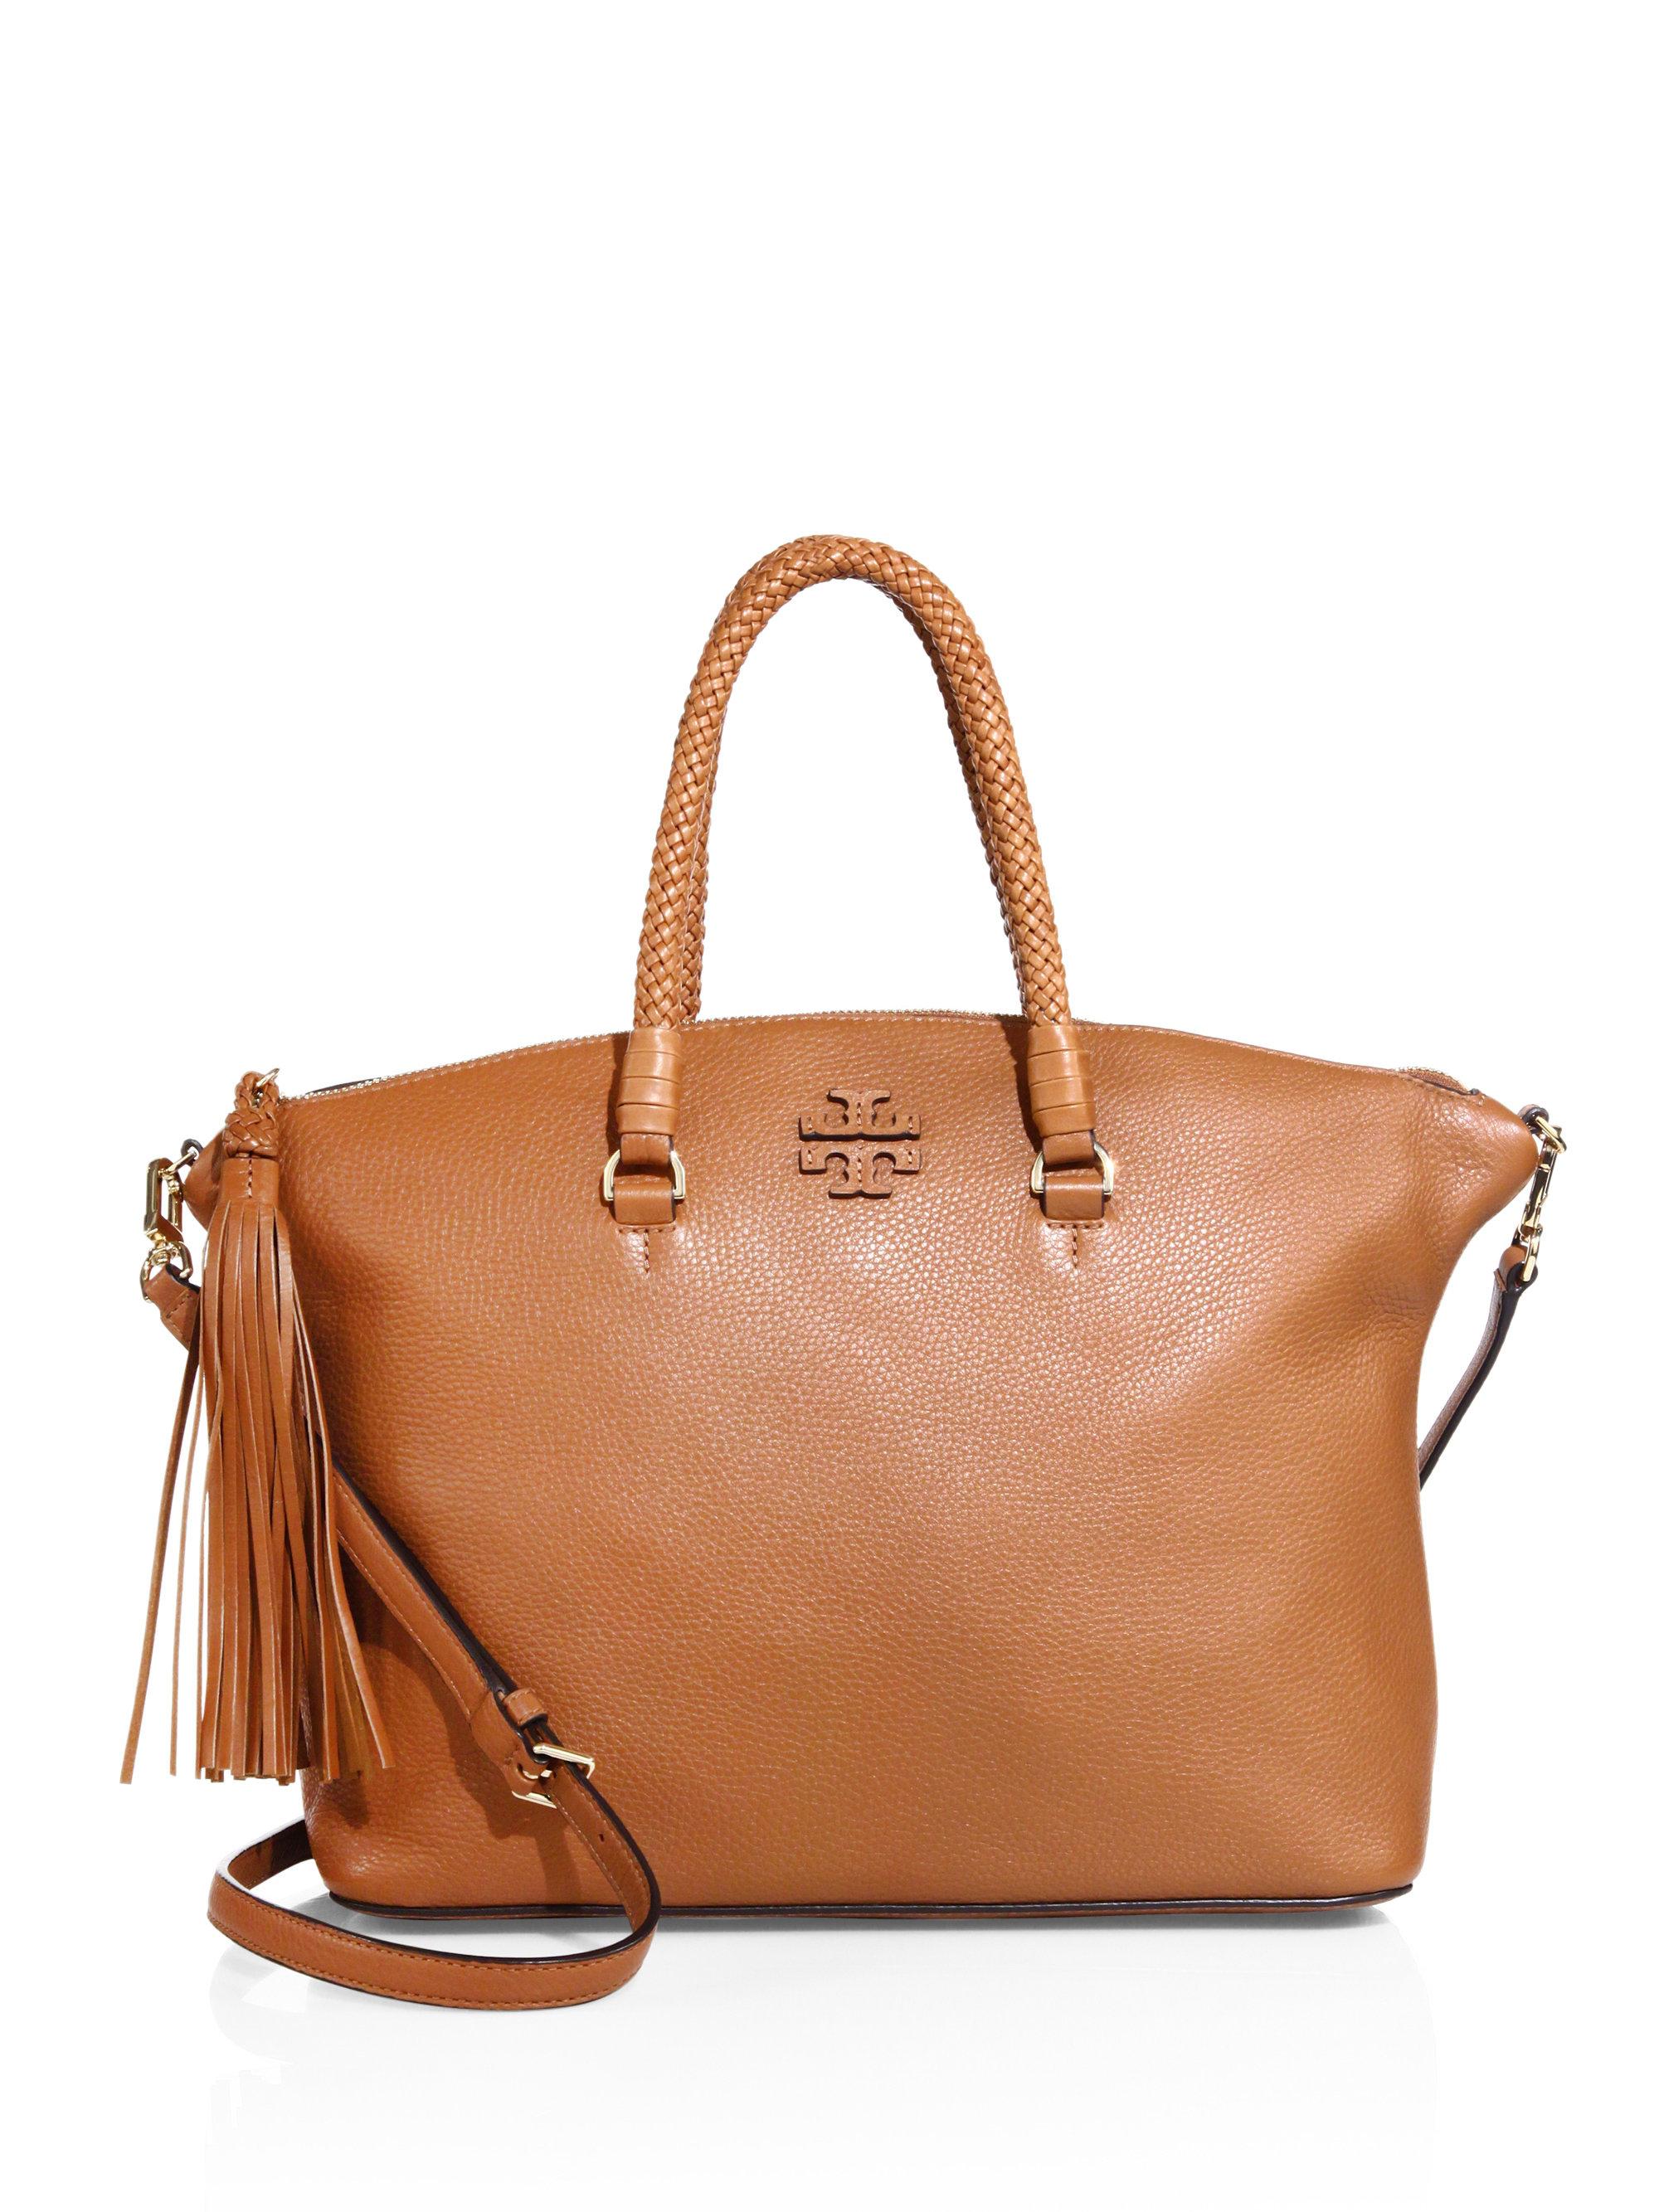 style check on Instagram: Tory Burch Thea Mini Slouchy Satchel